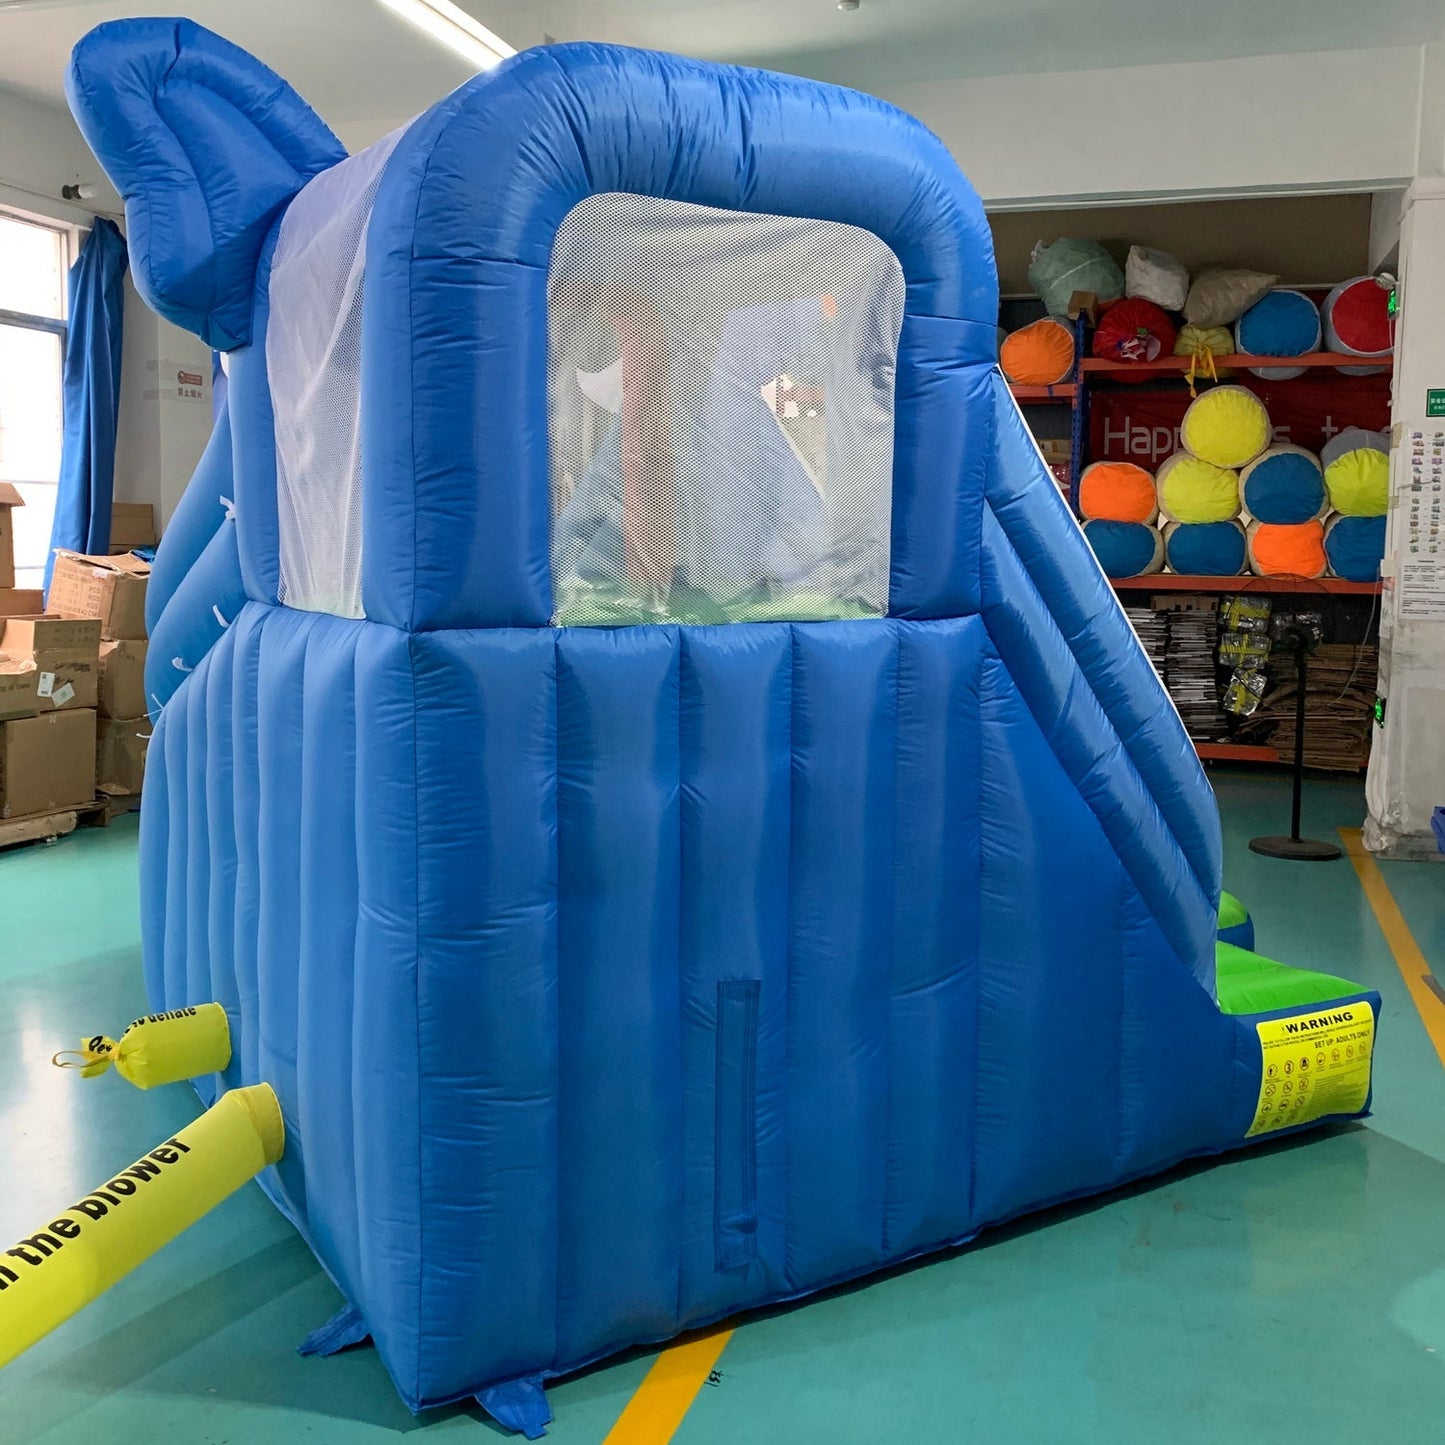 YARD Elephant Inflatable Water Slide for Child